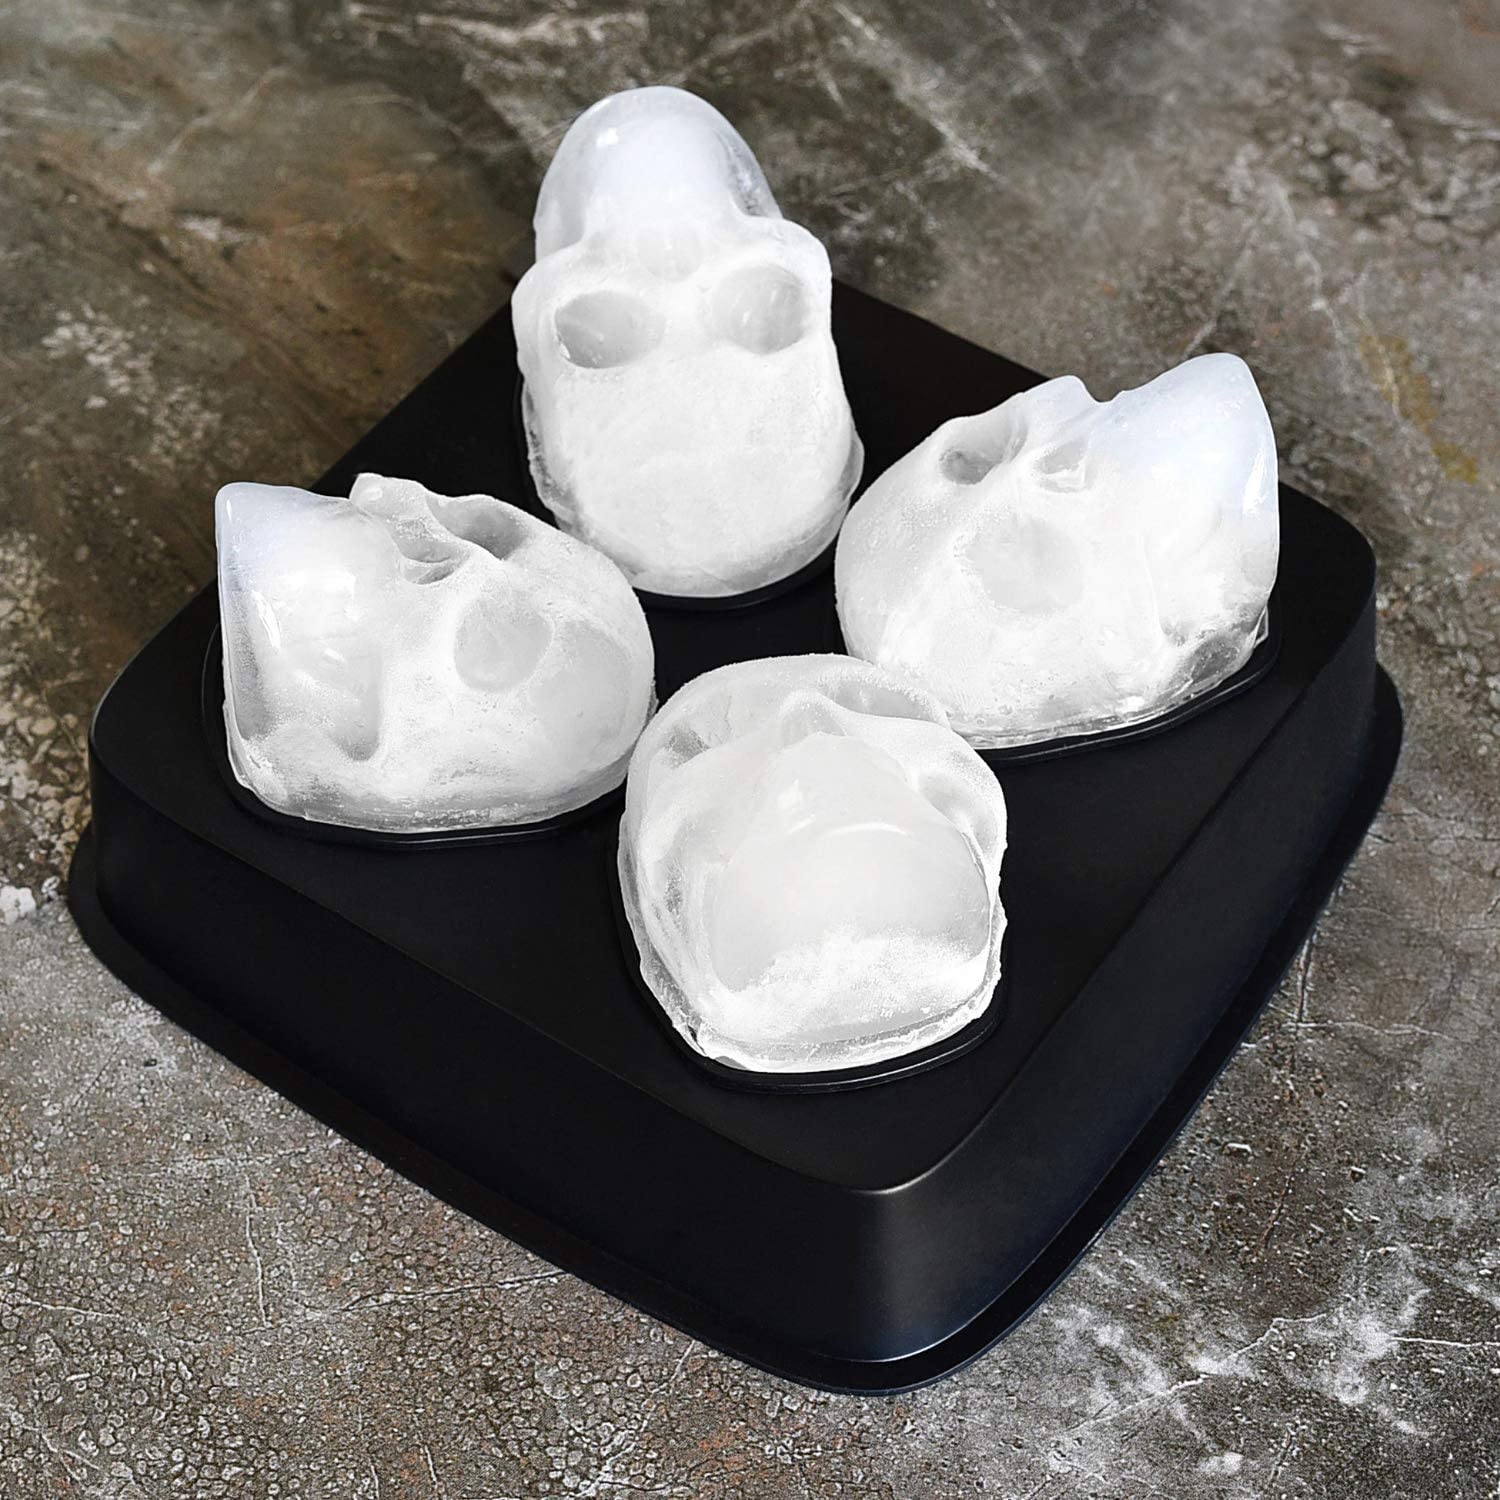 Get your drink on with these awesome skull shaped ice cubes –